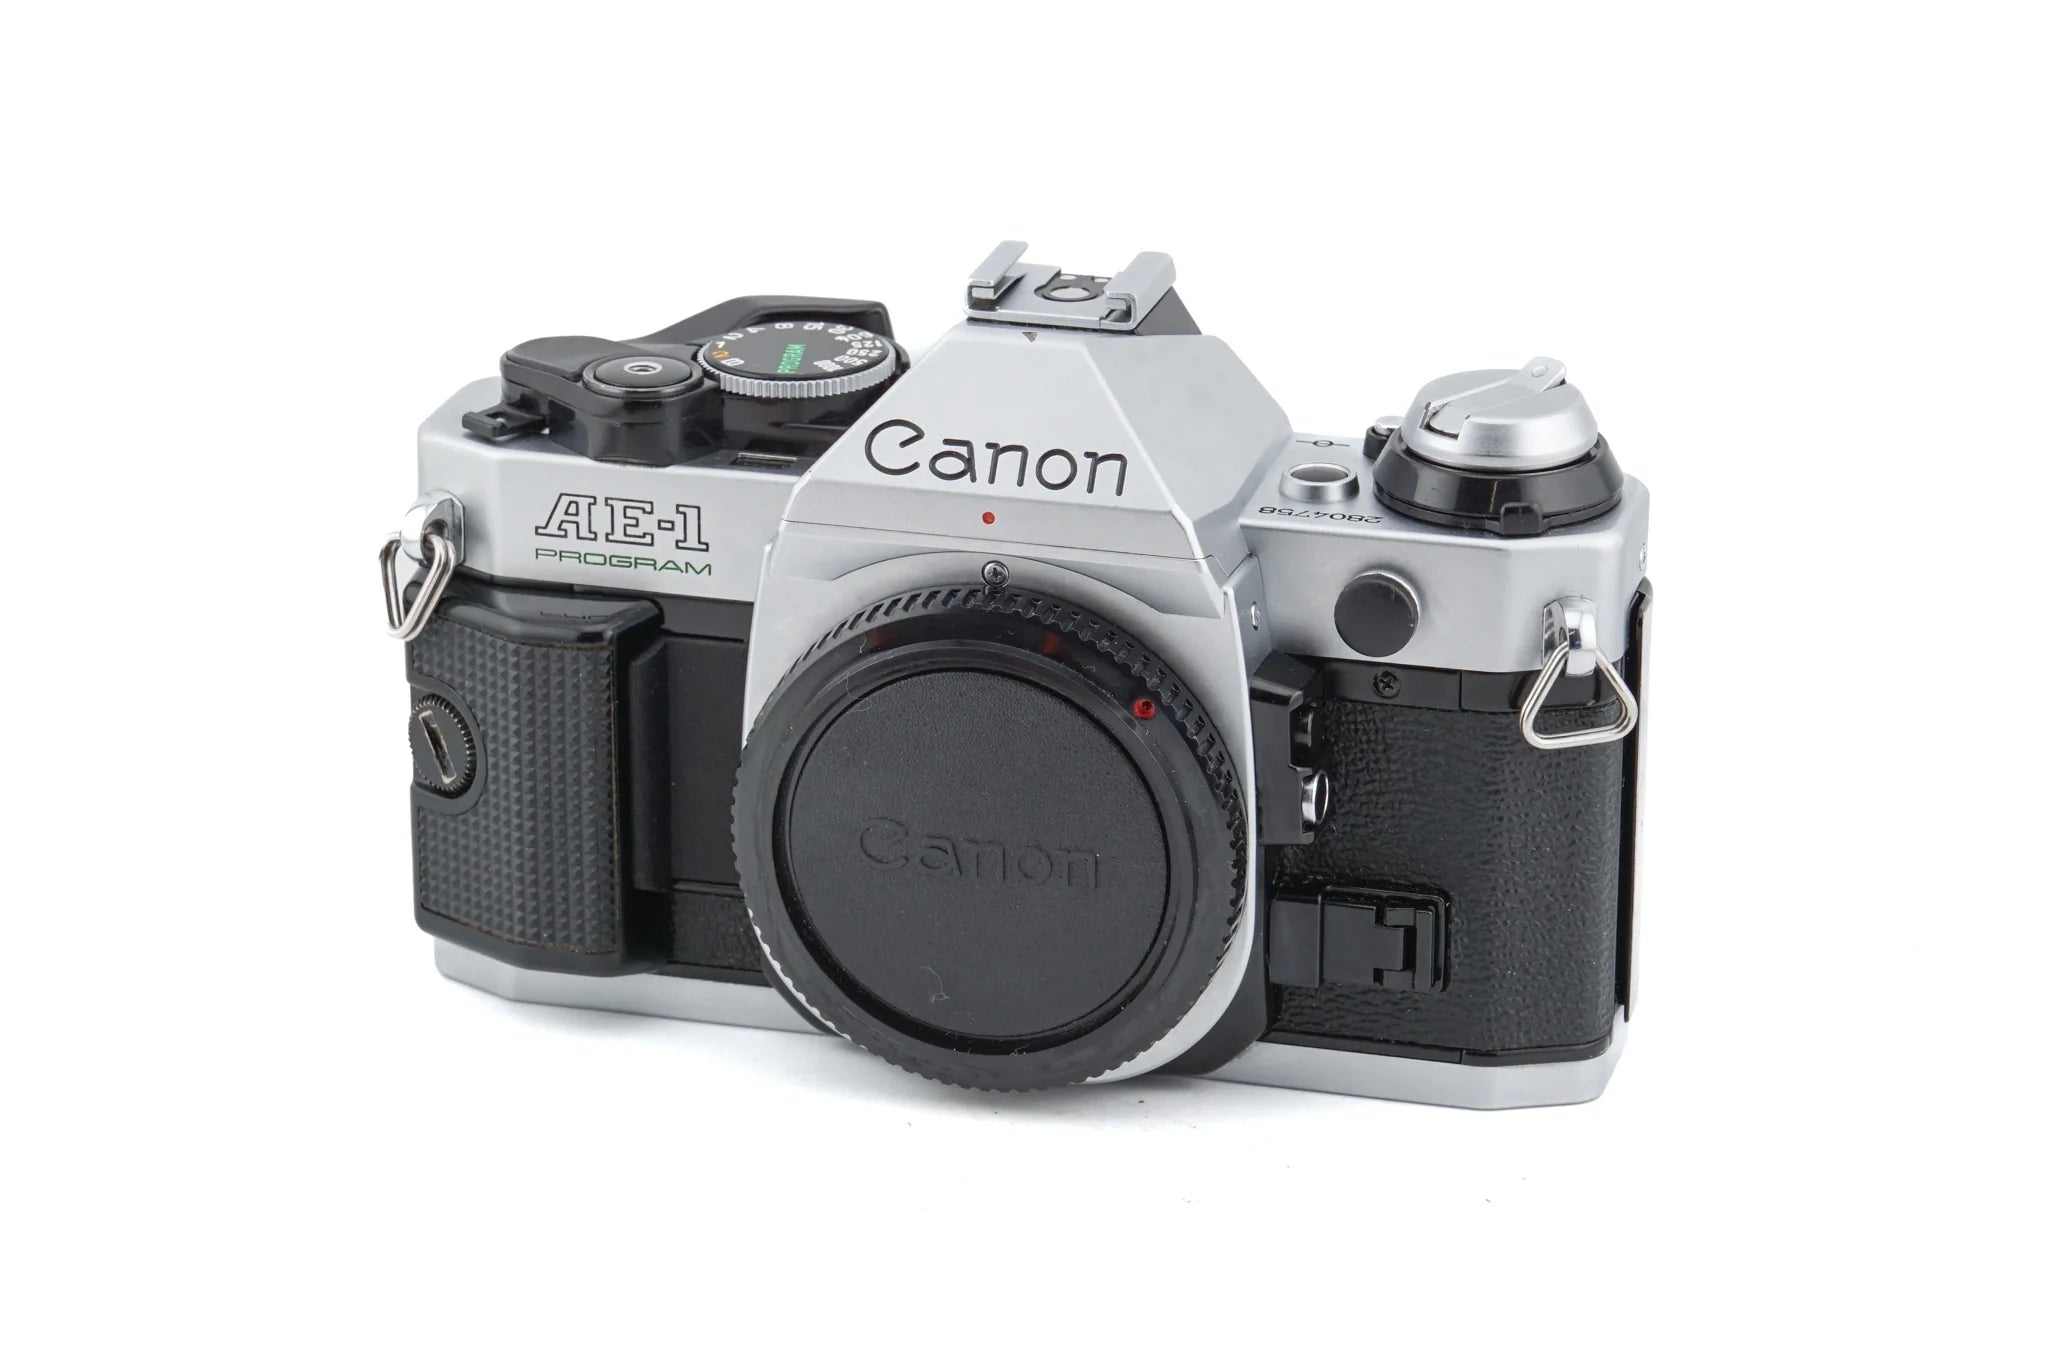 Canon AE-1 Program - 35mm Film Camera - with 6 month warranty